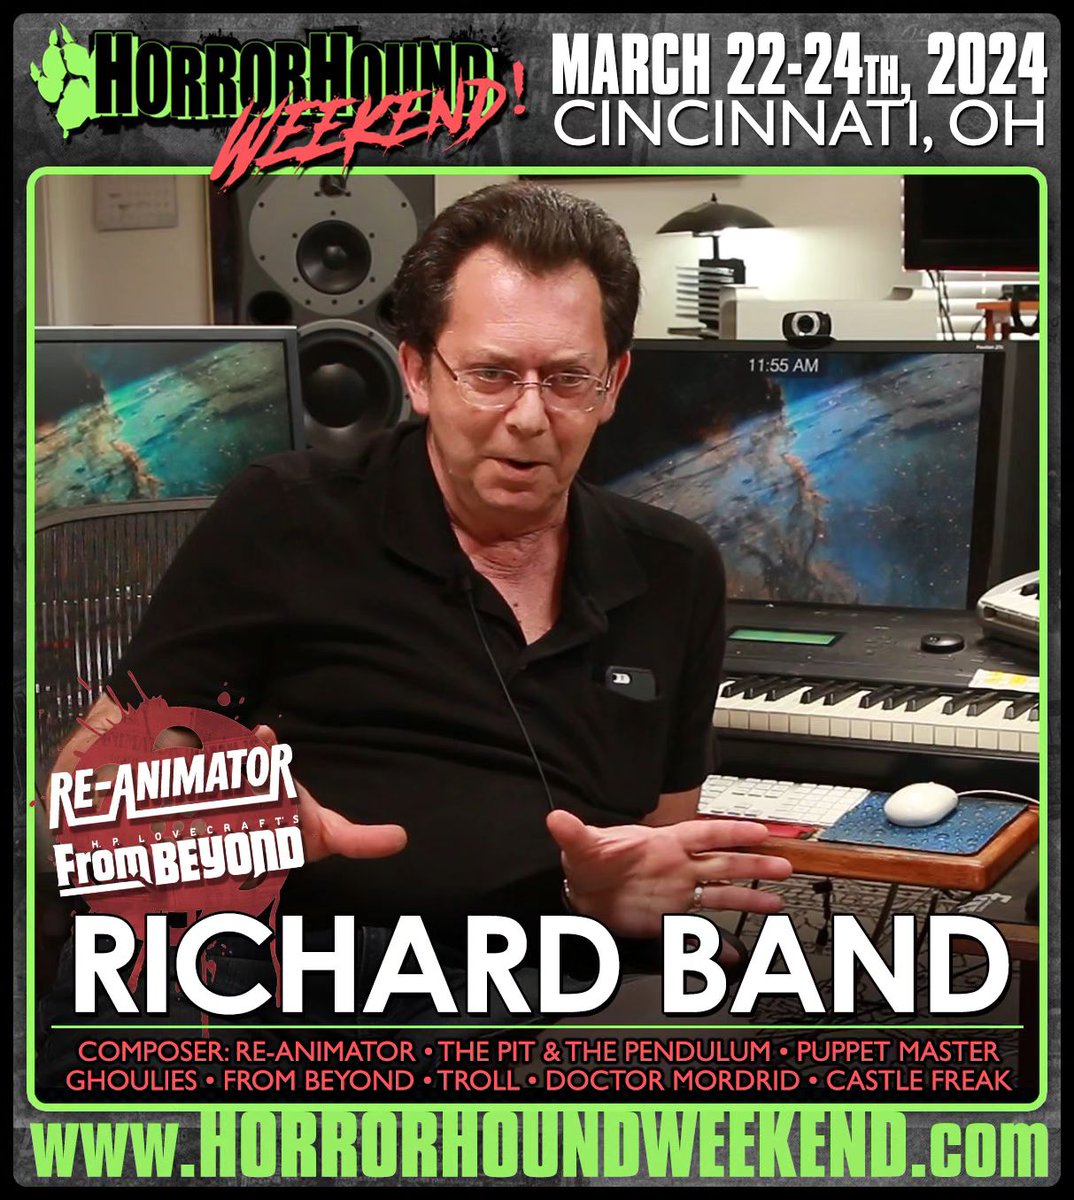 Hey y'all. Come visit me as HorrorHound Weekend returns to Cincinnati, Ohio this MARCH 22-24th, 2024. This will be the LARGEST HorrorHound Weekend event Cincinnati has EVER SEEN – They are celebrating 15 years of HHW in Cincinnati. New LPs, CDs & more!